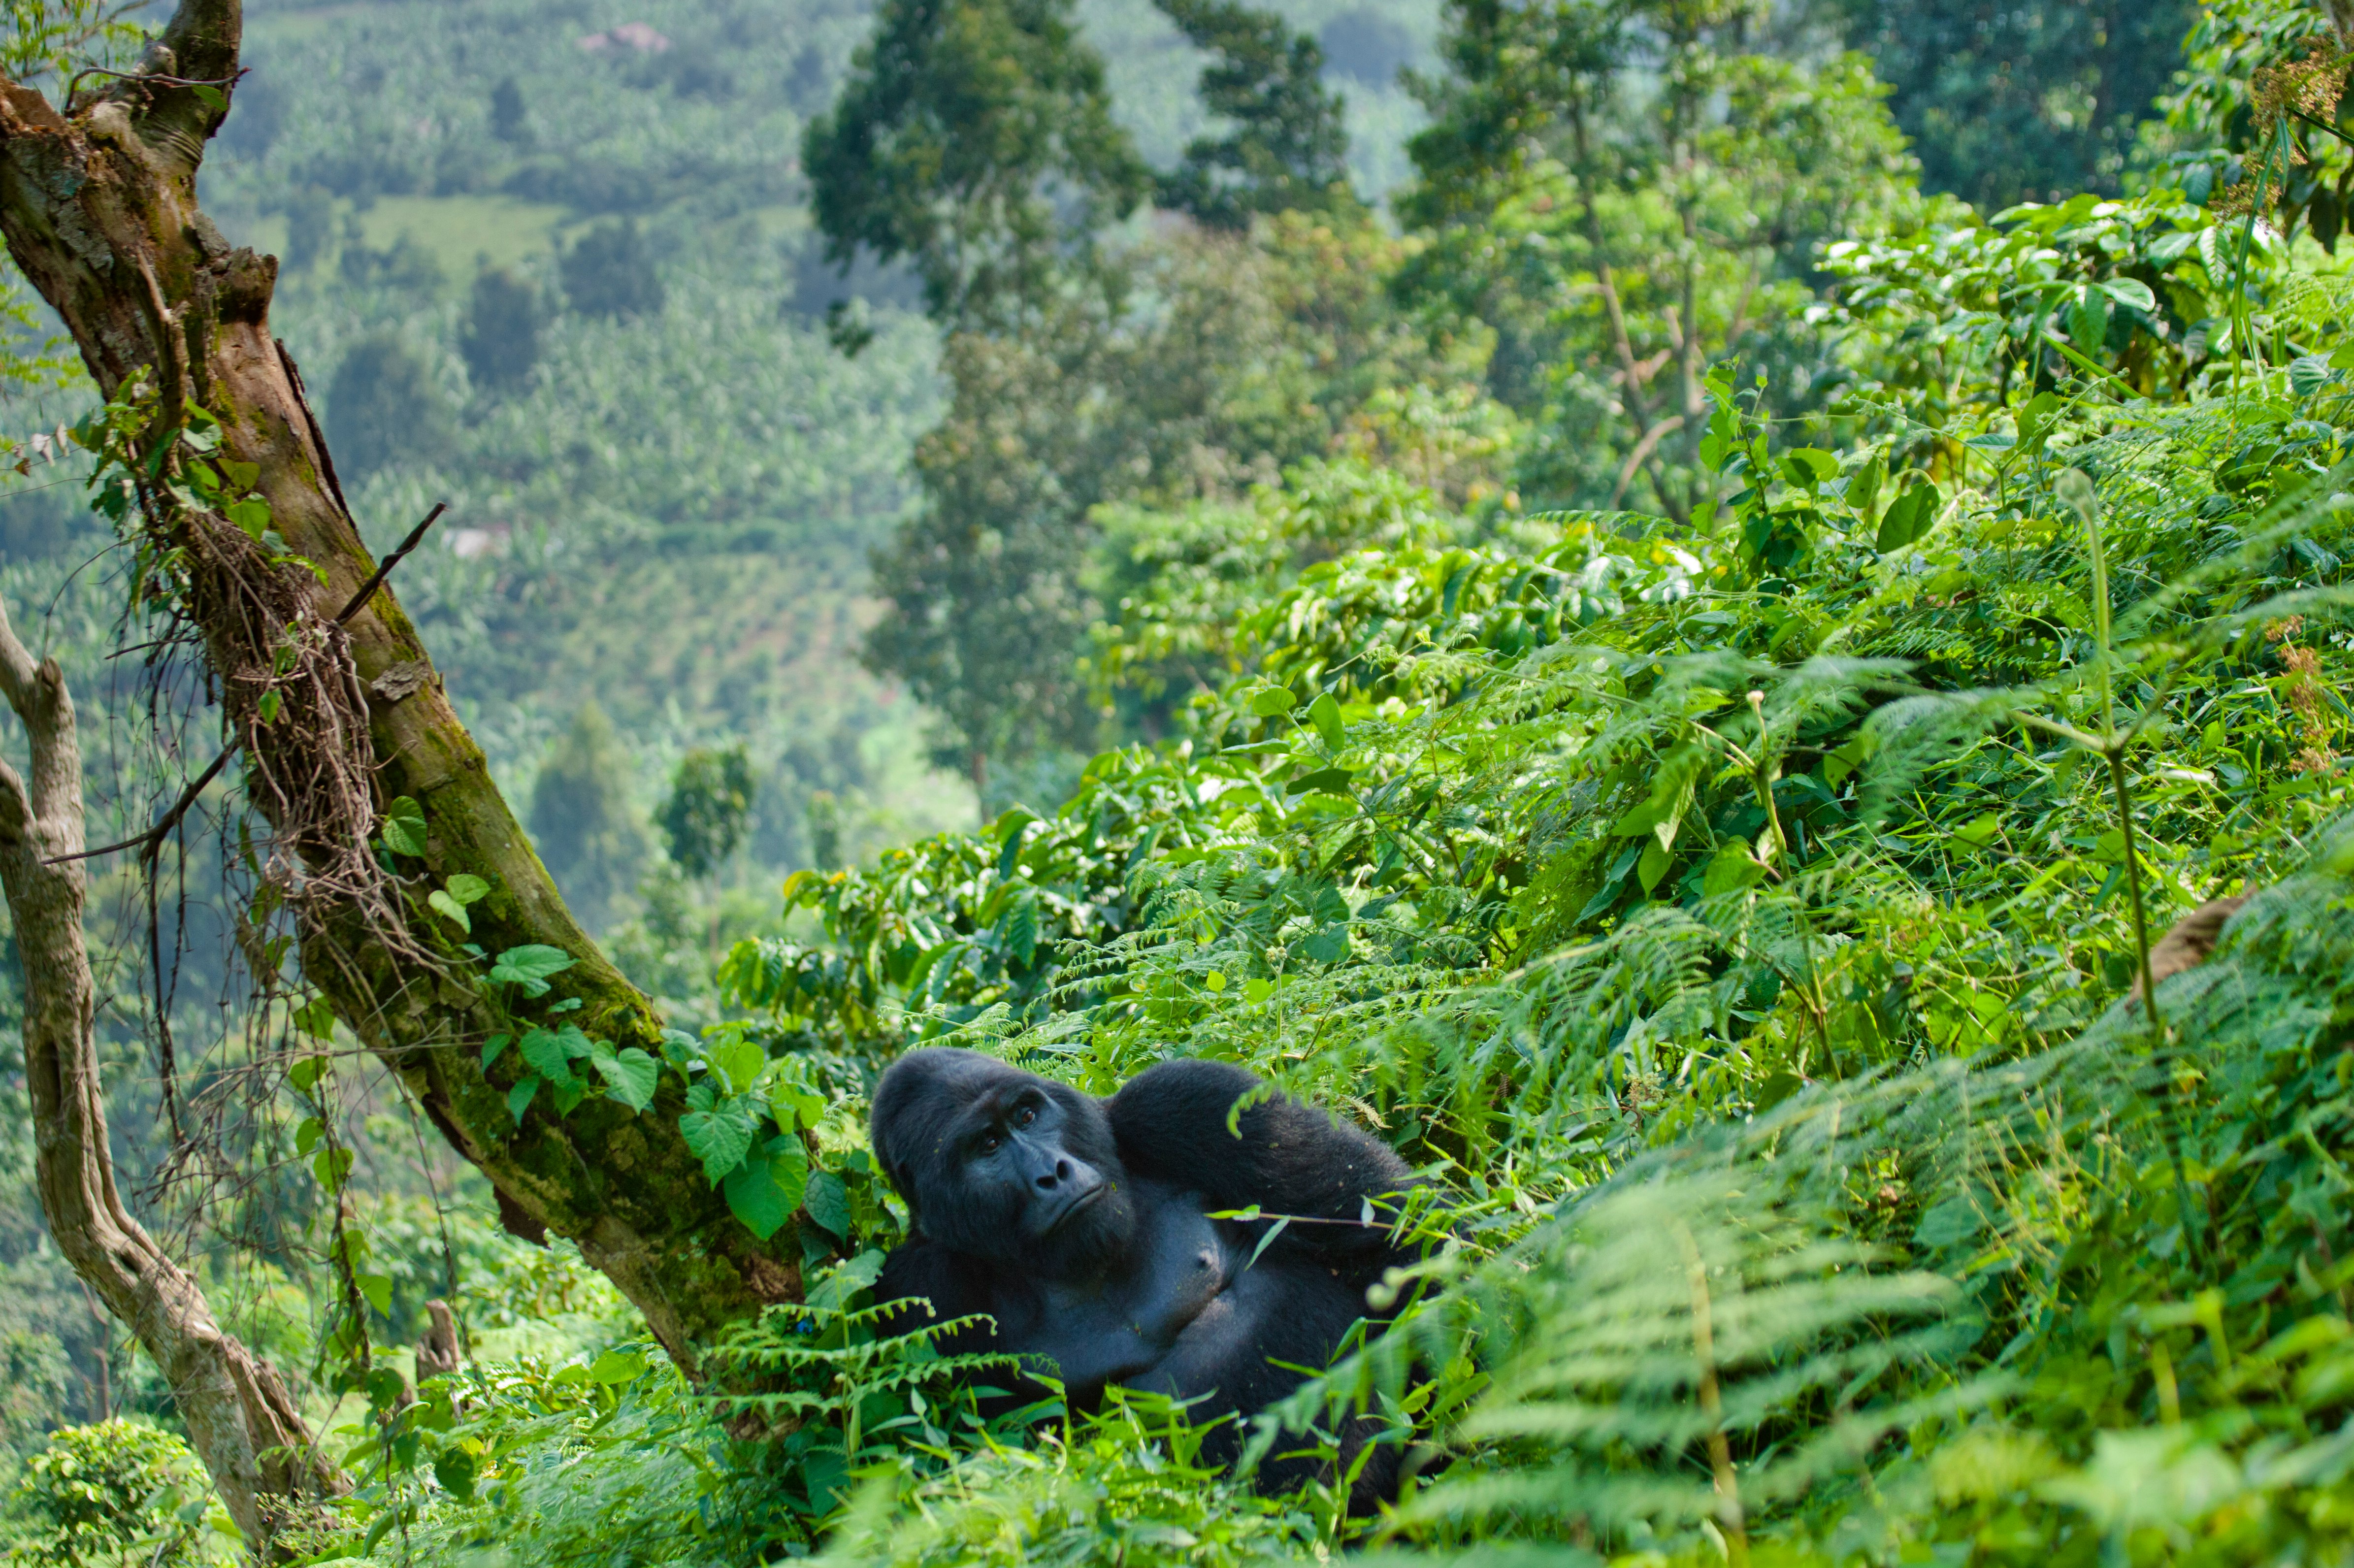 Dominant male mountain gorilla in the grass. Uganda. Bwindi Impenetrable Forest National Park. An excellent illustration. – © gudkovandrey - Fotolia